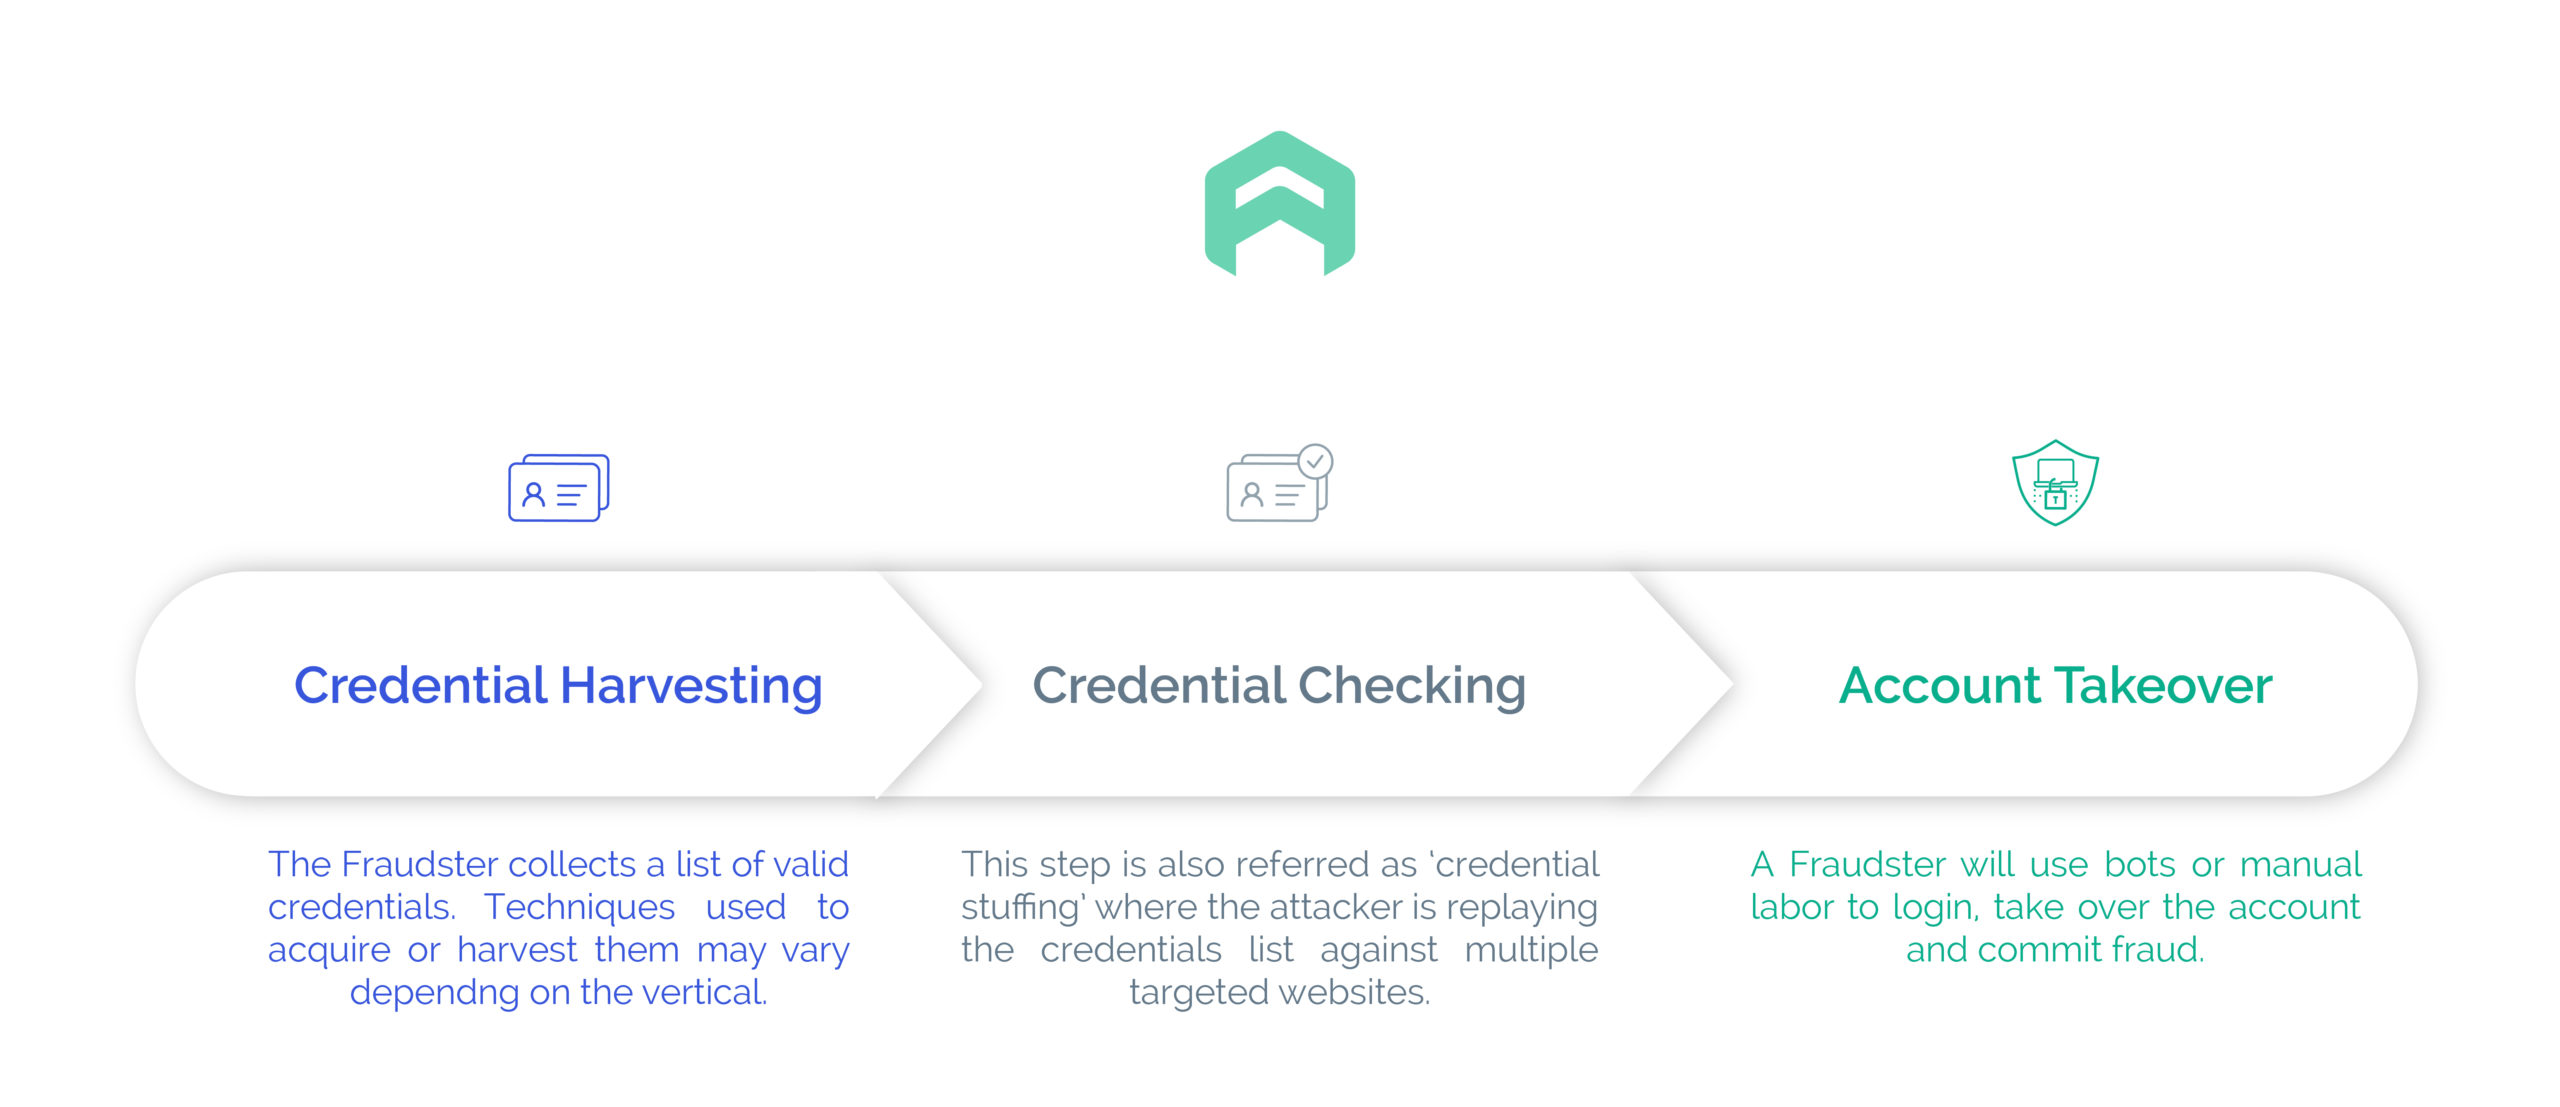 credential harvesting, credential checking, account takeover